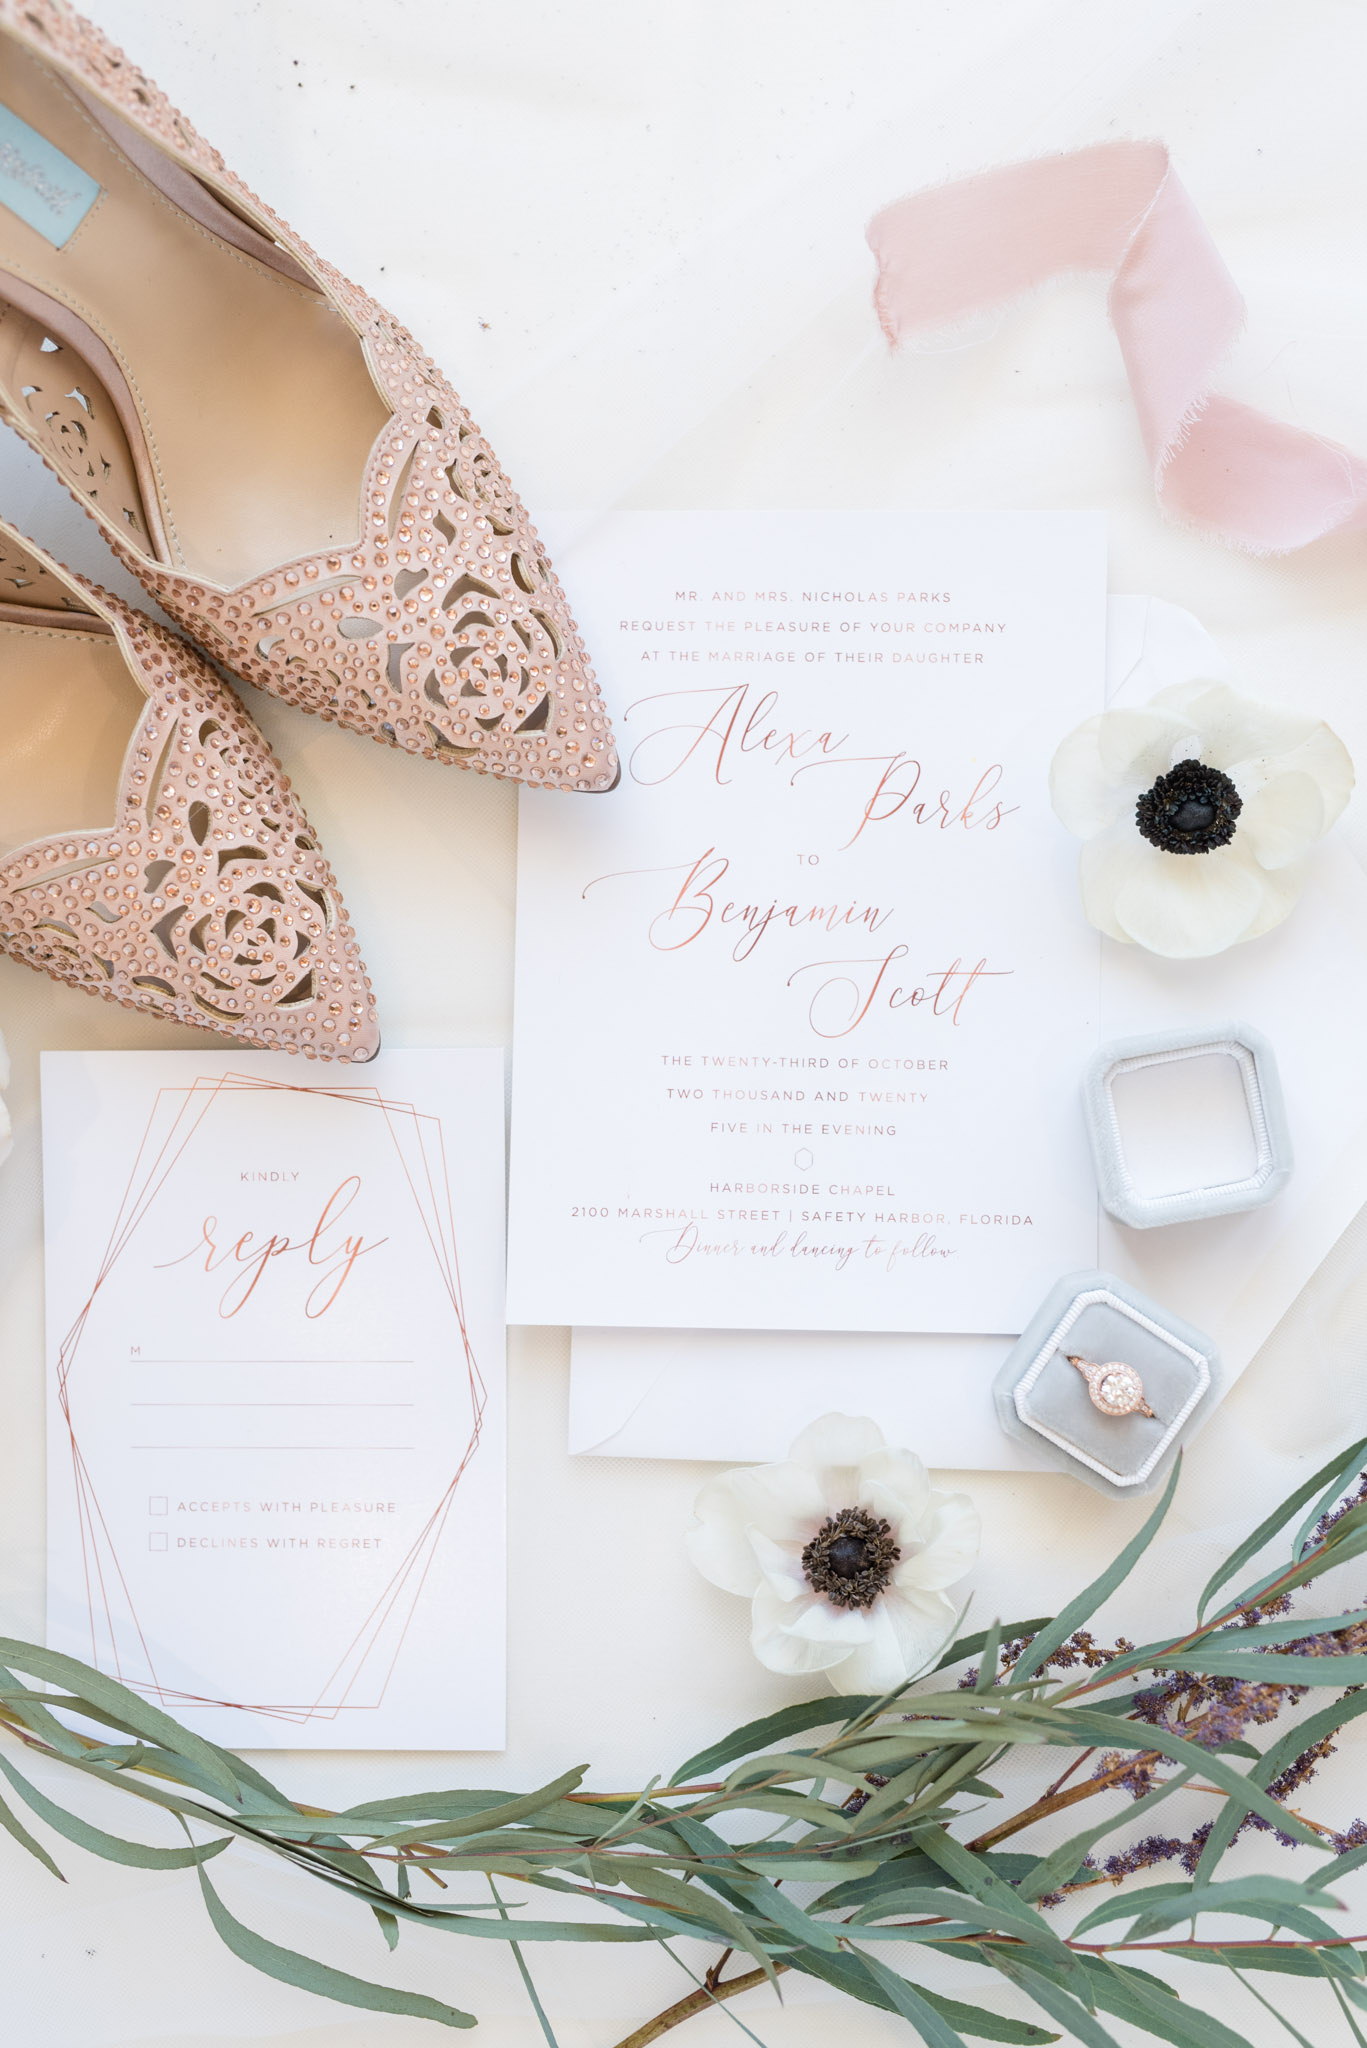 Bride's details and wedding invitations.